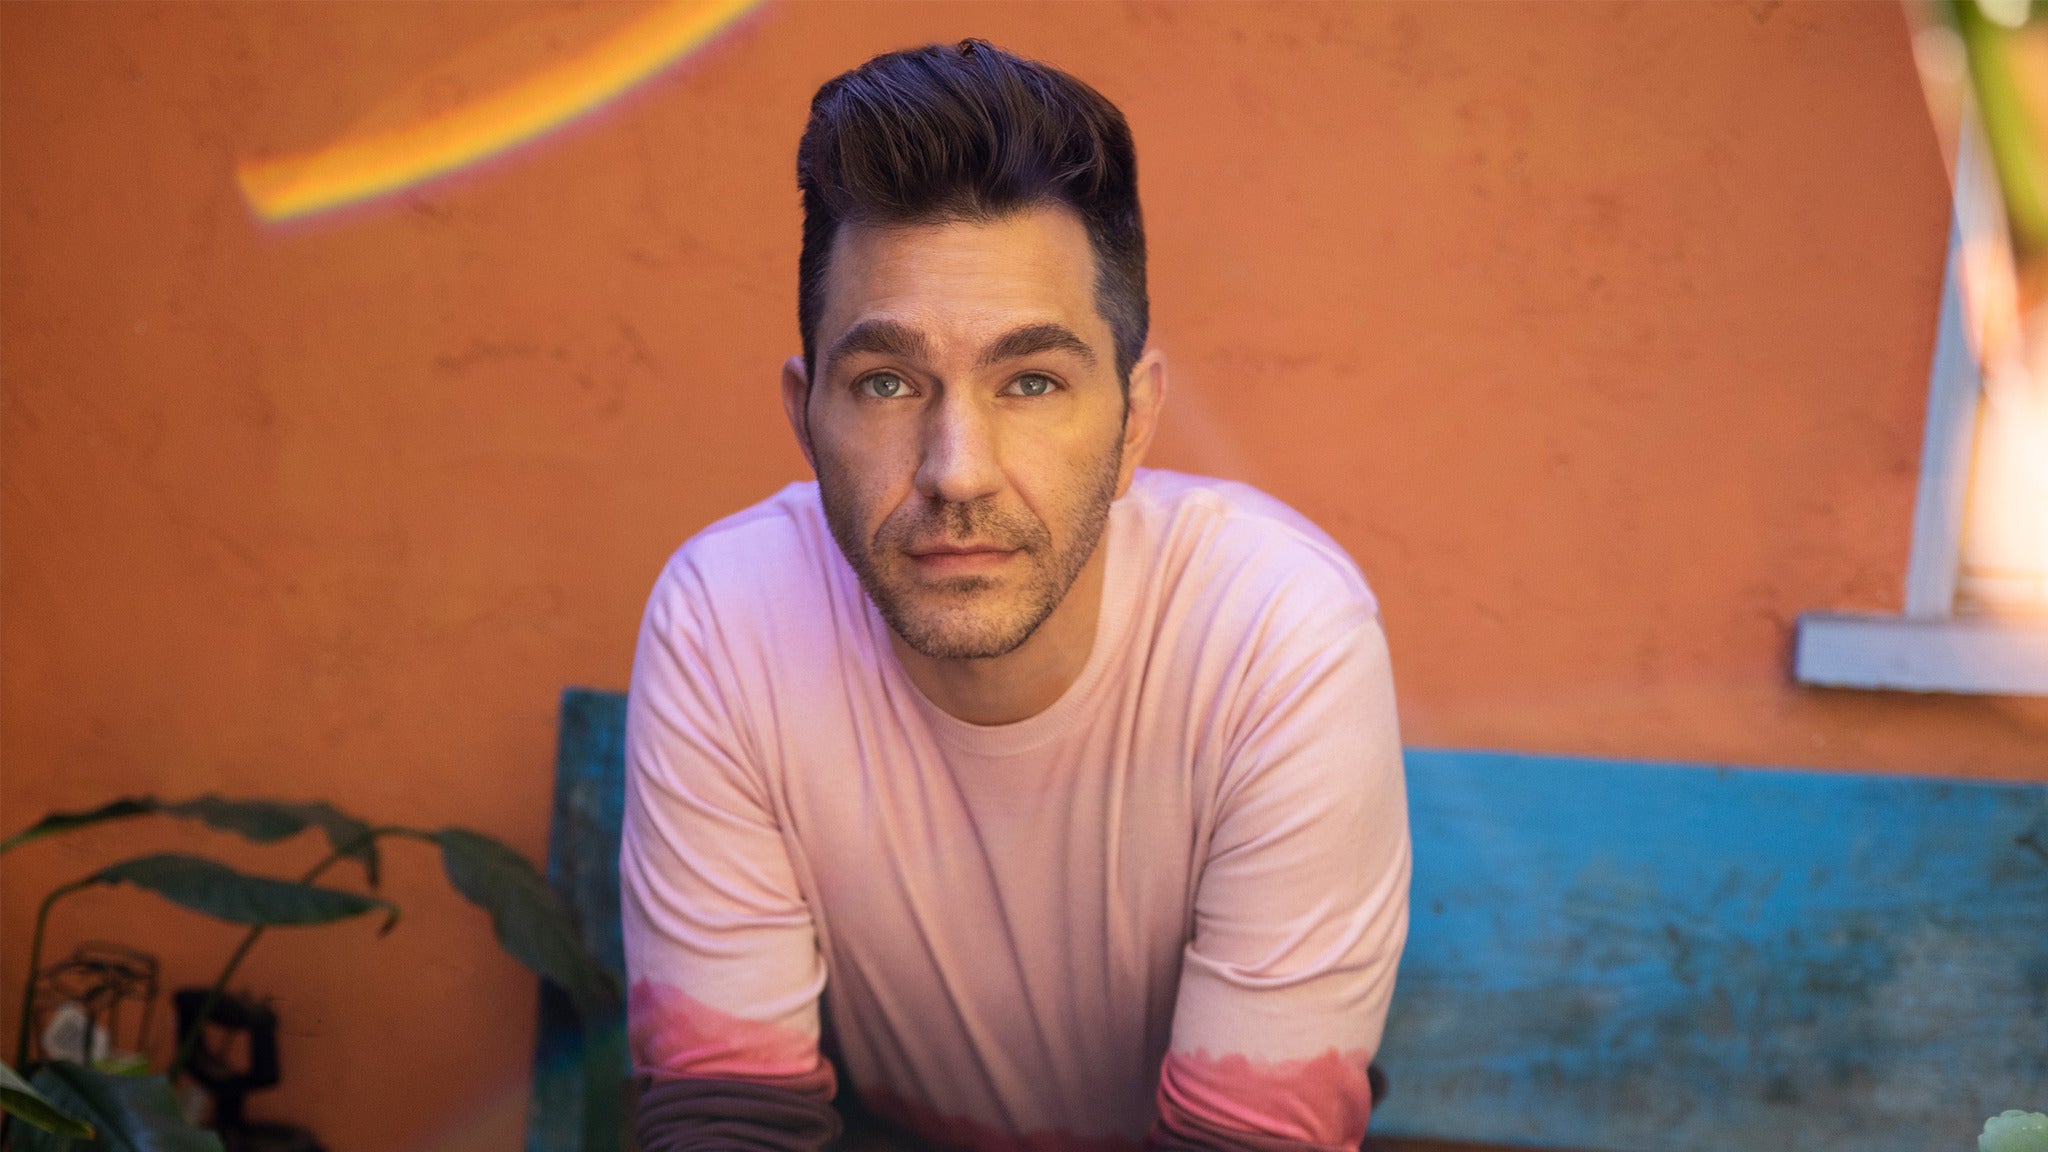 Andy Grammer at Florida Theatre Jacksonville